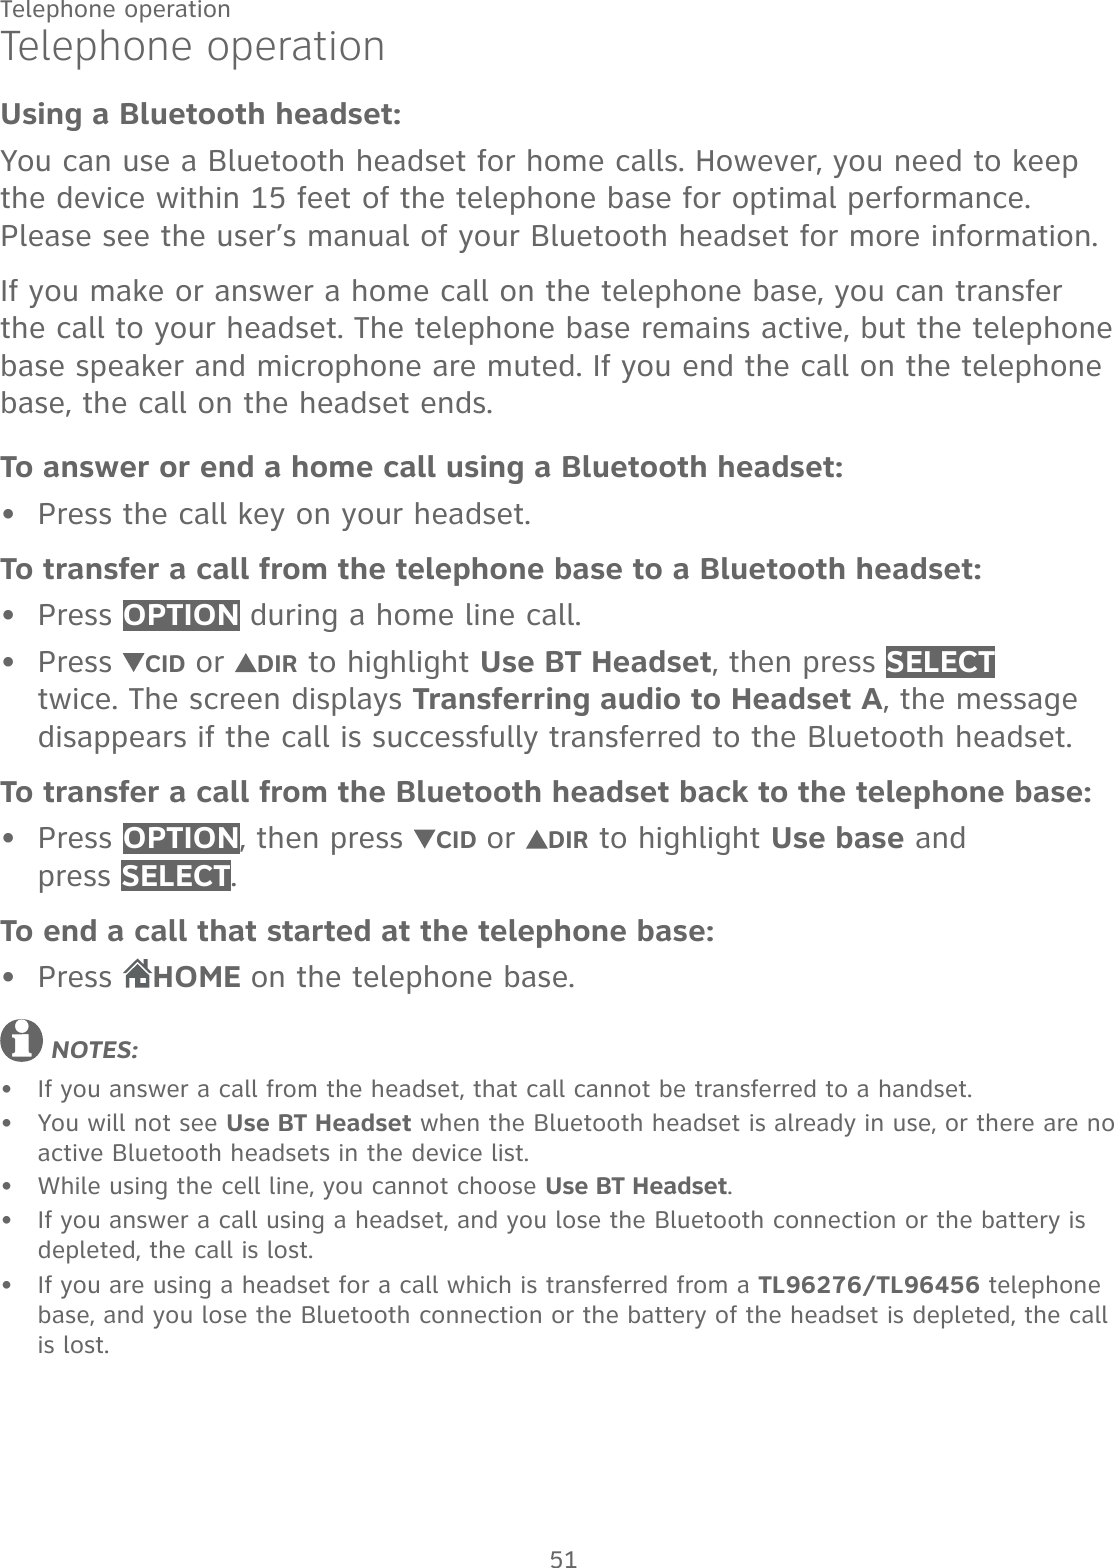 51Telephone operationTelephone operationUsing a Bluetooth headset:You can use a Bluetooth headset for home calls. However, you need to keep the device within 15 feet of the telephone base for optimal performance. Please see the user’s manual of your Bluetooth headset for more information.If you make or answer a home call on the telephone base, you can transfer the call to your headset. The telephone base remains active, but the telephone base speaker and microphone are muted. If you end the call on the telephone base, the call on the headset ends.To answer or end a home call using a Bluetooth headset:Press the call key on your headset.To transfer a call from the telephone base to a Bluetooth headset:Press OPTION during a home line call.Press  CID or  DIR to highlight Use BT Headset, then press SELECT twice. The screen displays Transferring audio to Headset A, the message disappears if the call is successfully transferred to the Bluetooth headset.To transfer a call from the Bluetooth headset back to the telephone base:Press OPTION, then press  CID or  DIR to highlight Use base and  press SELECT.To end a call that started at the telephone base:Press  HOME on the telephone base. NOTES: If you answer a call from the headset, that call cannot be transferred to a handset.You will not see Use BT Headset when the Bluetooth headset is already in use, or there are no active Bluetooth headsets in the device list.While using the cell line, you cannot choose Use BT Headset.If you answer a call using a headset, and you lose the Bluetooth connection or the battery is depleted, the call is lost.If you are using a headset for a call which is transferred from a TL96276/TL96456 telephone base, and you lose the Bluetooth connection or the battery of the headset is depleted, the call is lost.••••••••••